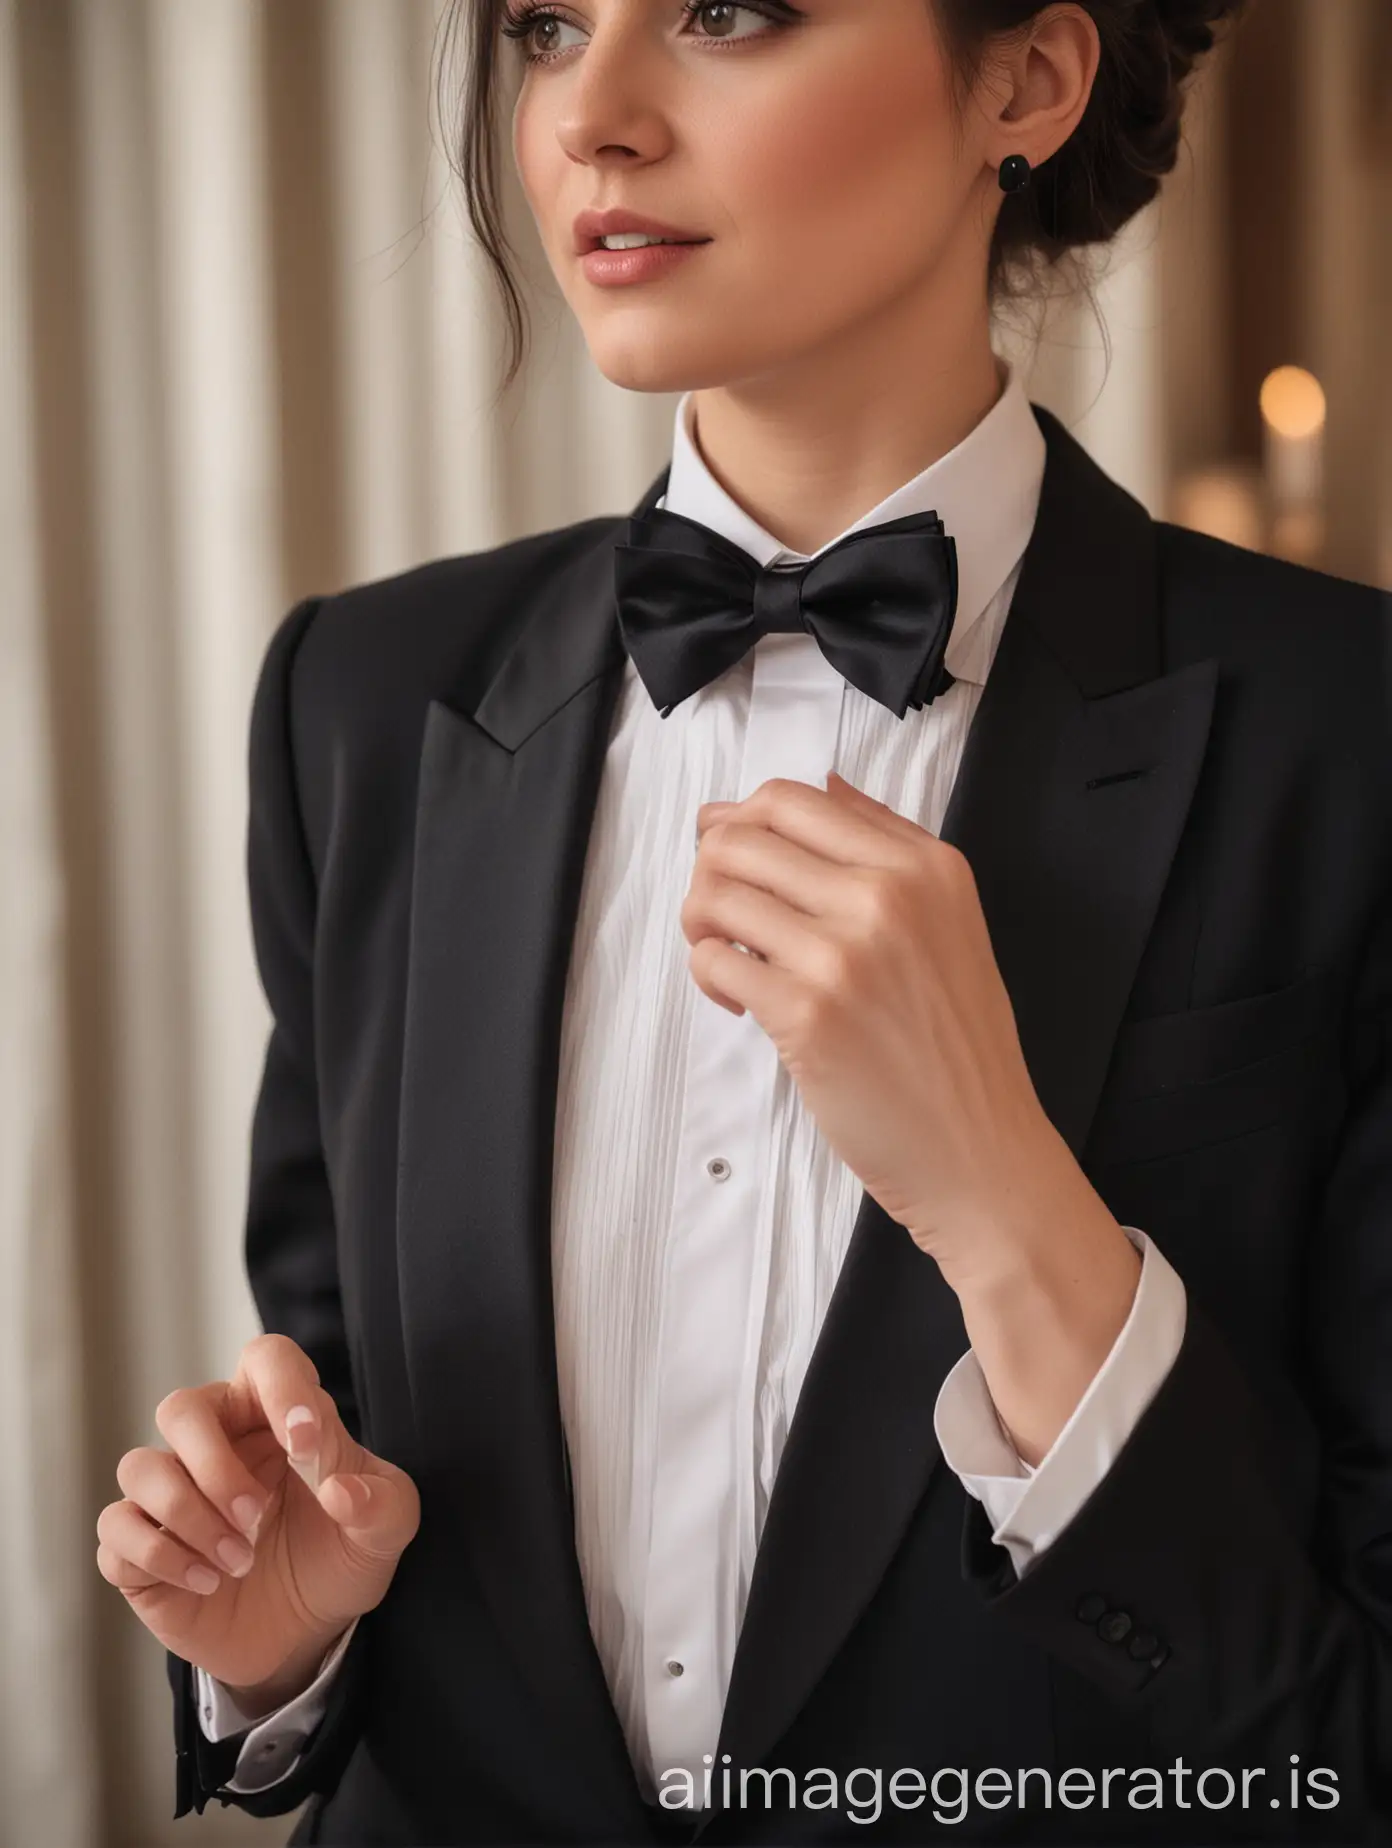 Woman body part, wearing a tuxedo with a black bow tie, hand adjust a black bow tie at the neck. She is at a dinner table.